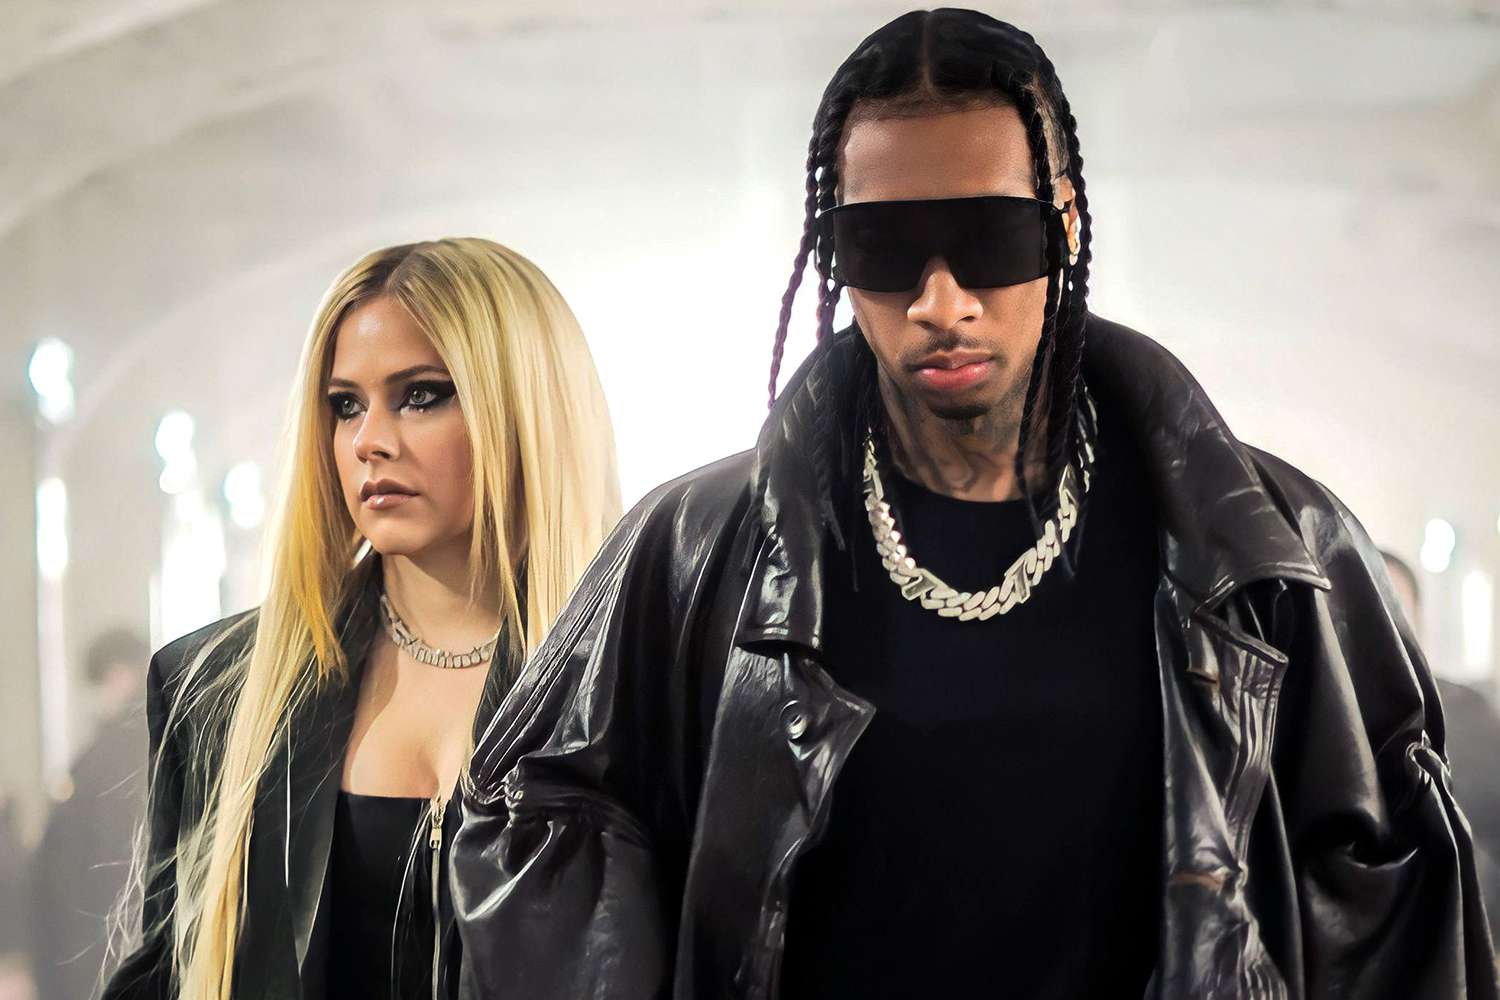 Tyga Drops $80,000 on a Diamond Chain as a Gift for Girlfriend Avril Lavigne | Gold Presidents